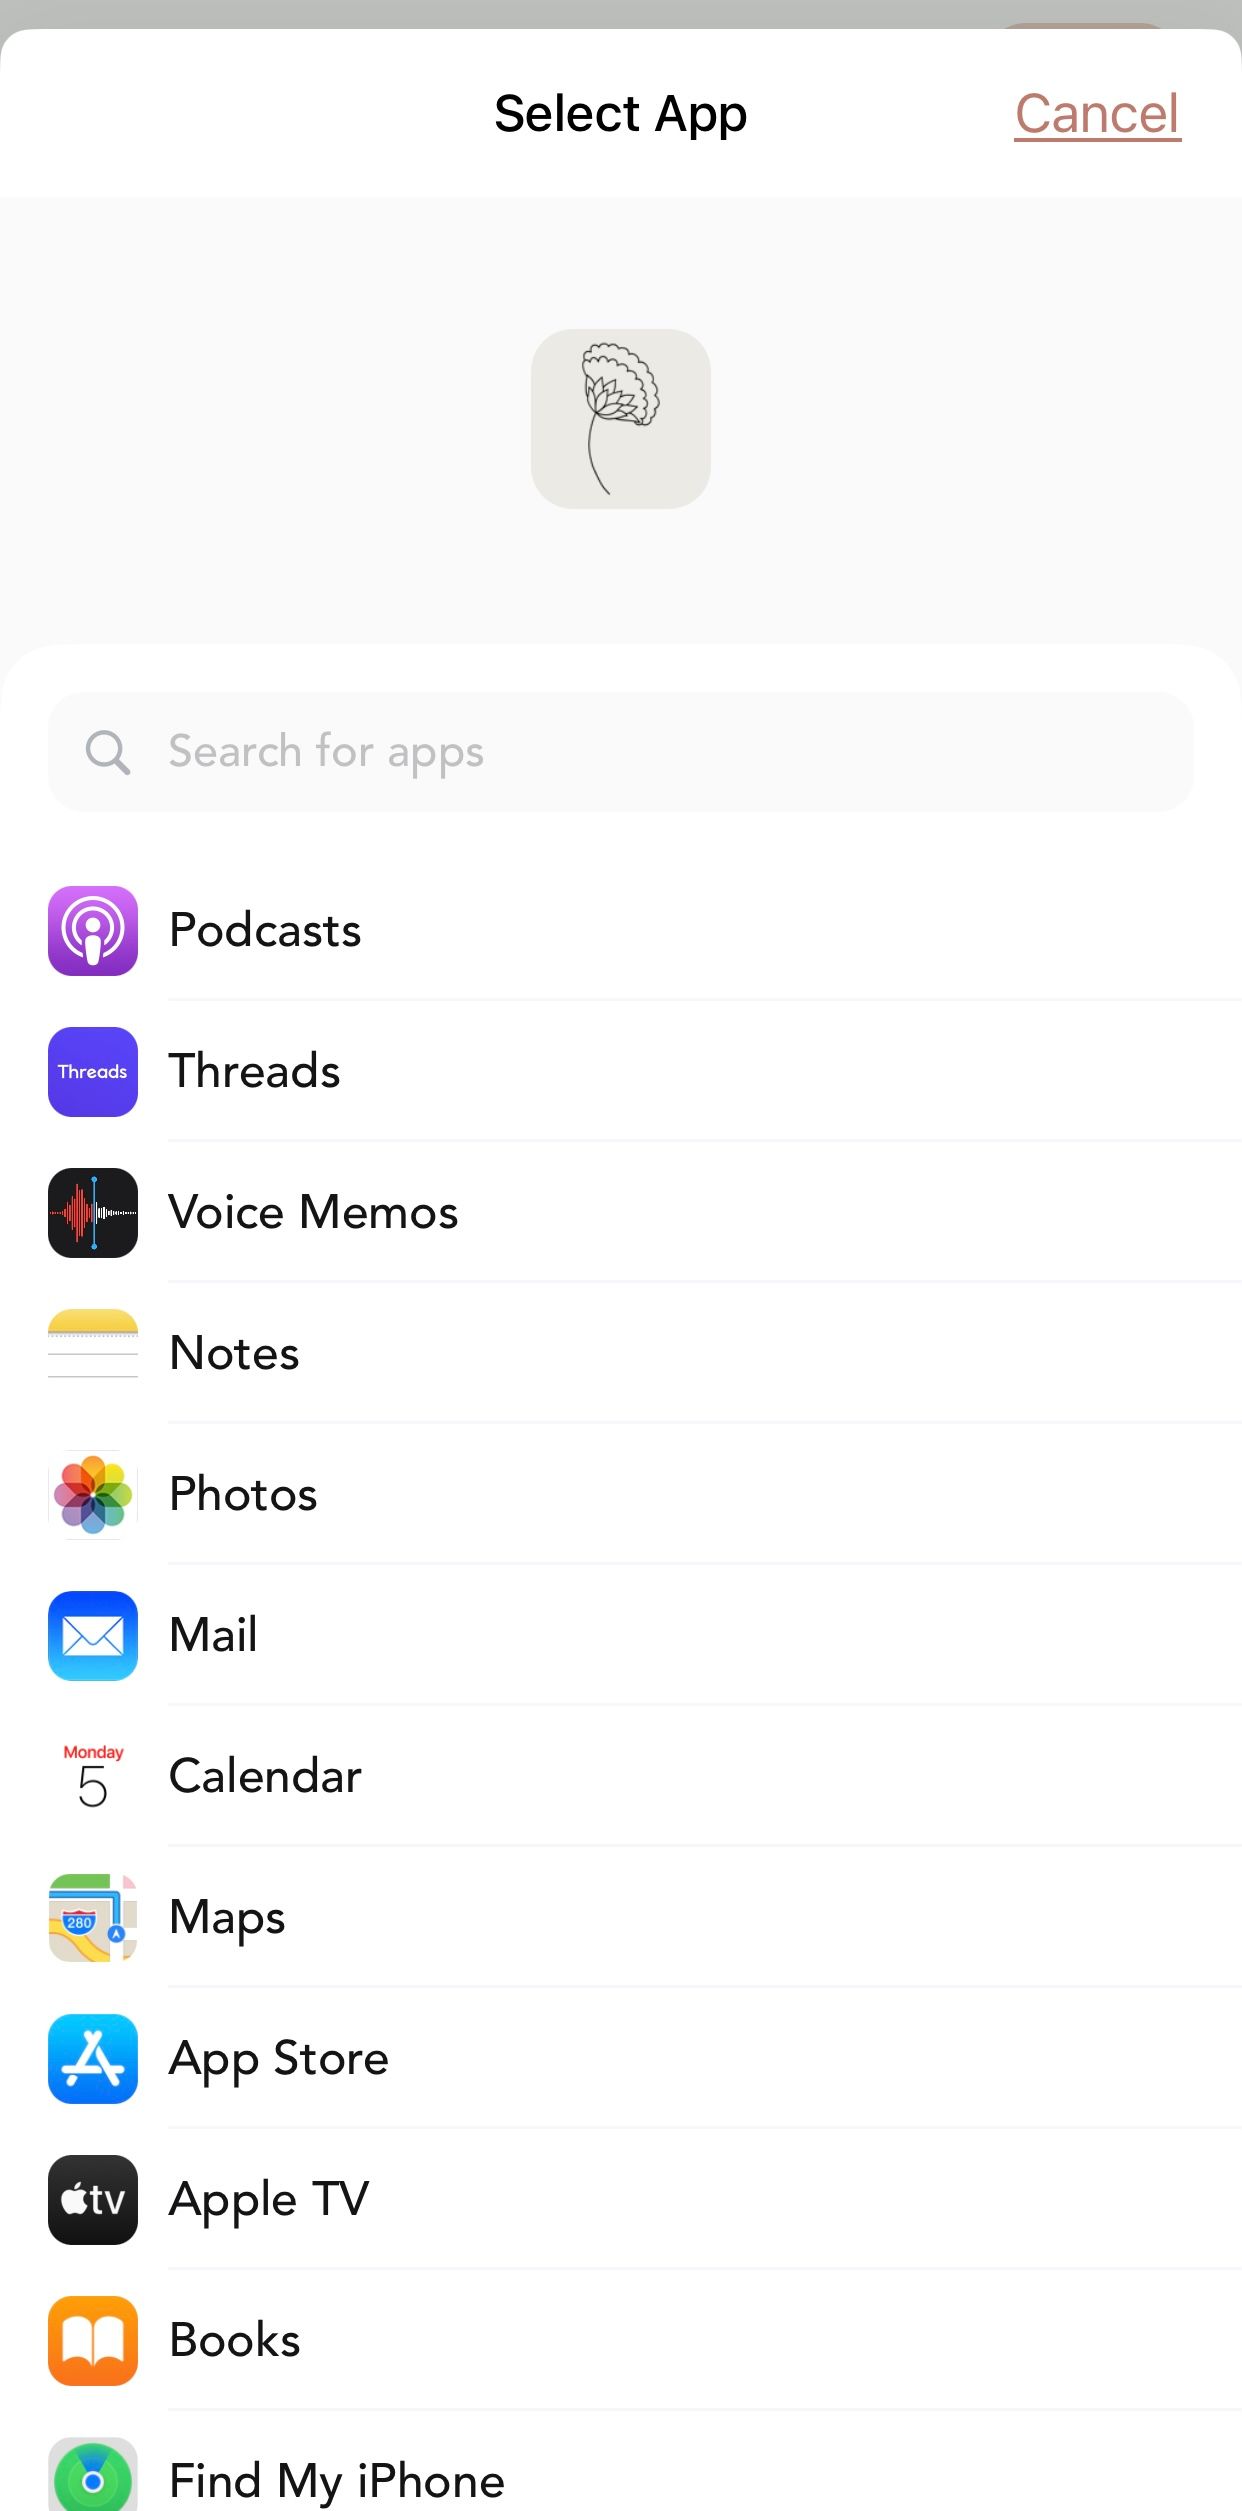 List of iPhone apps that can be replaced with Themify icons